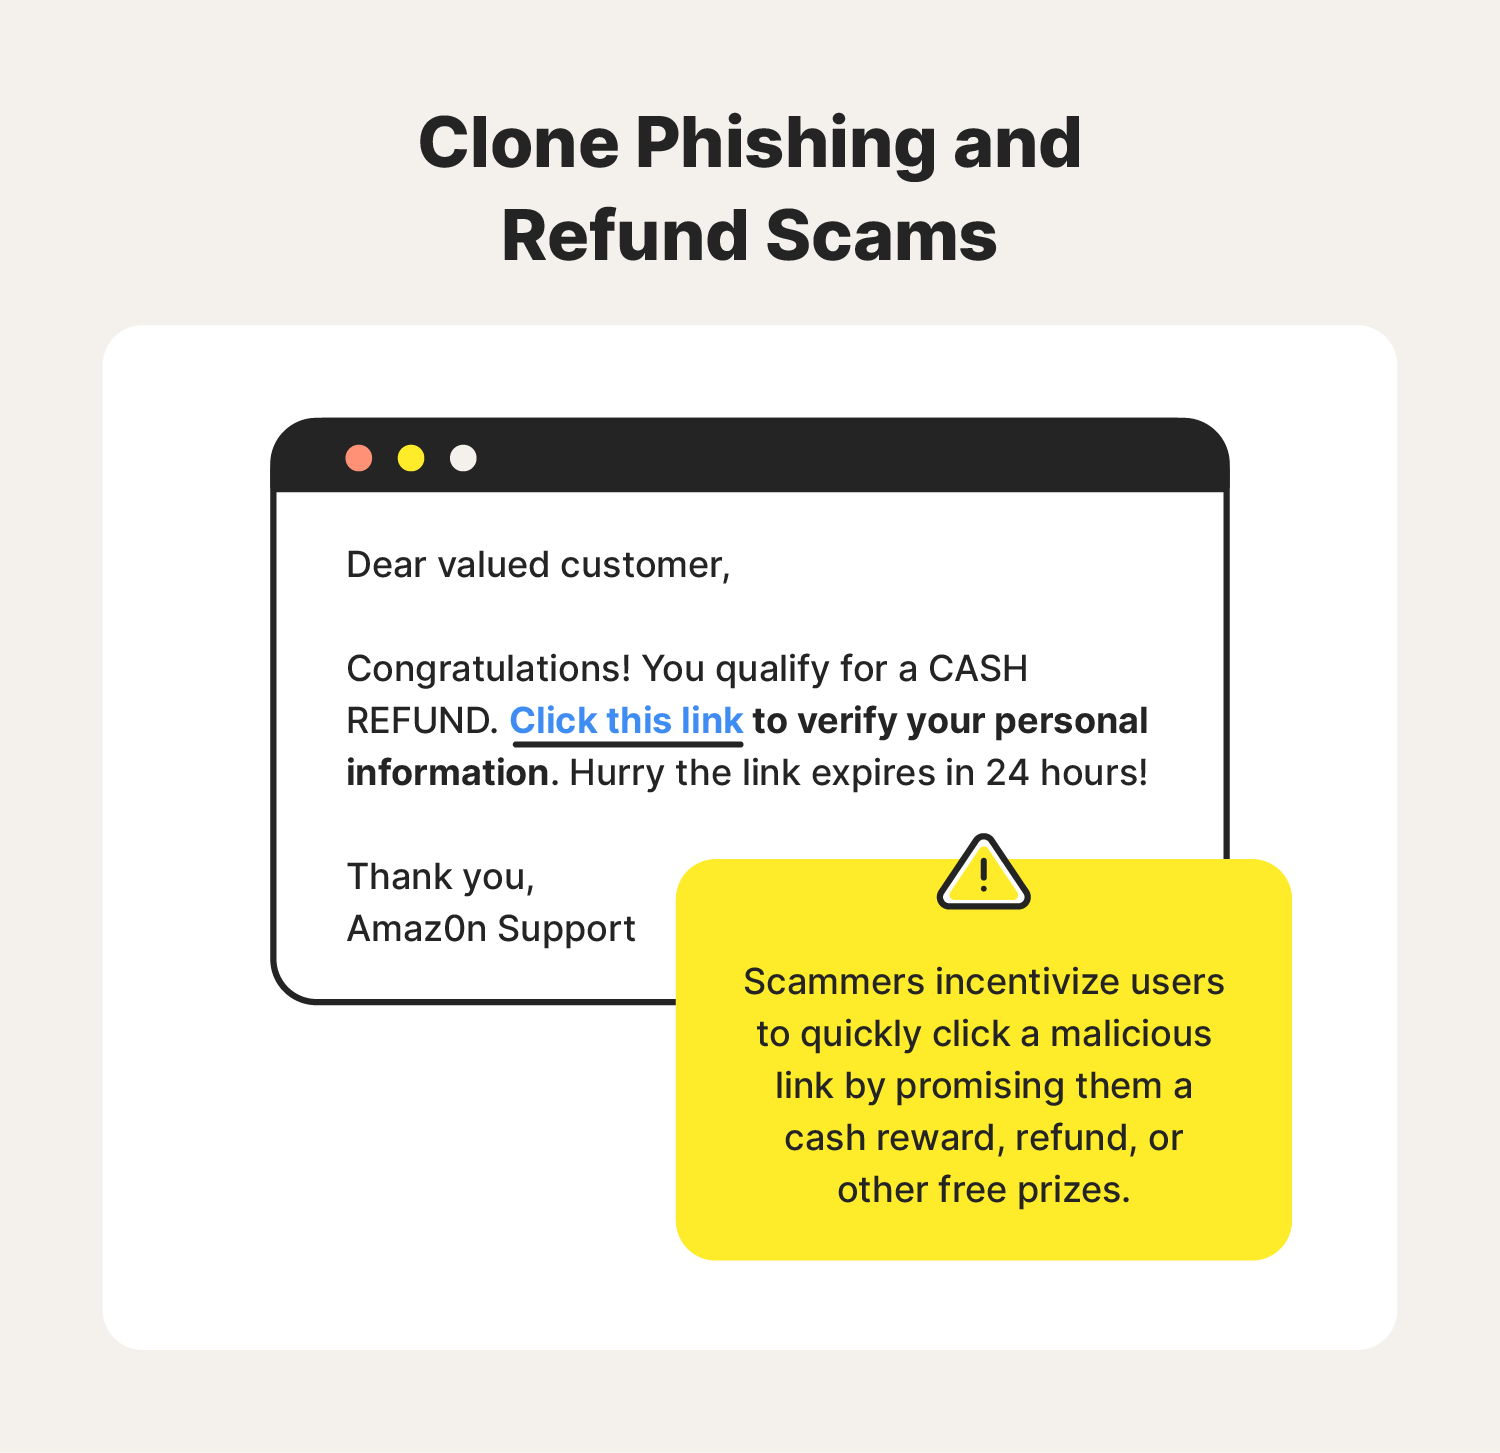 Illustrated example of a clone phishing refund scam.